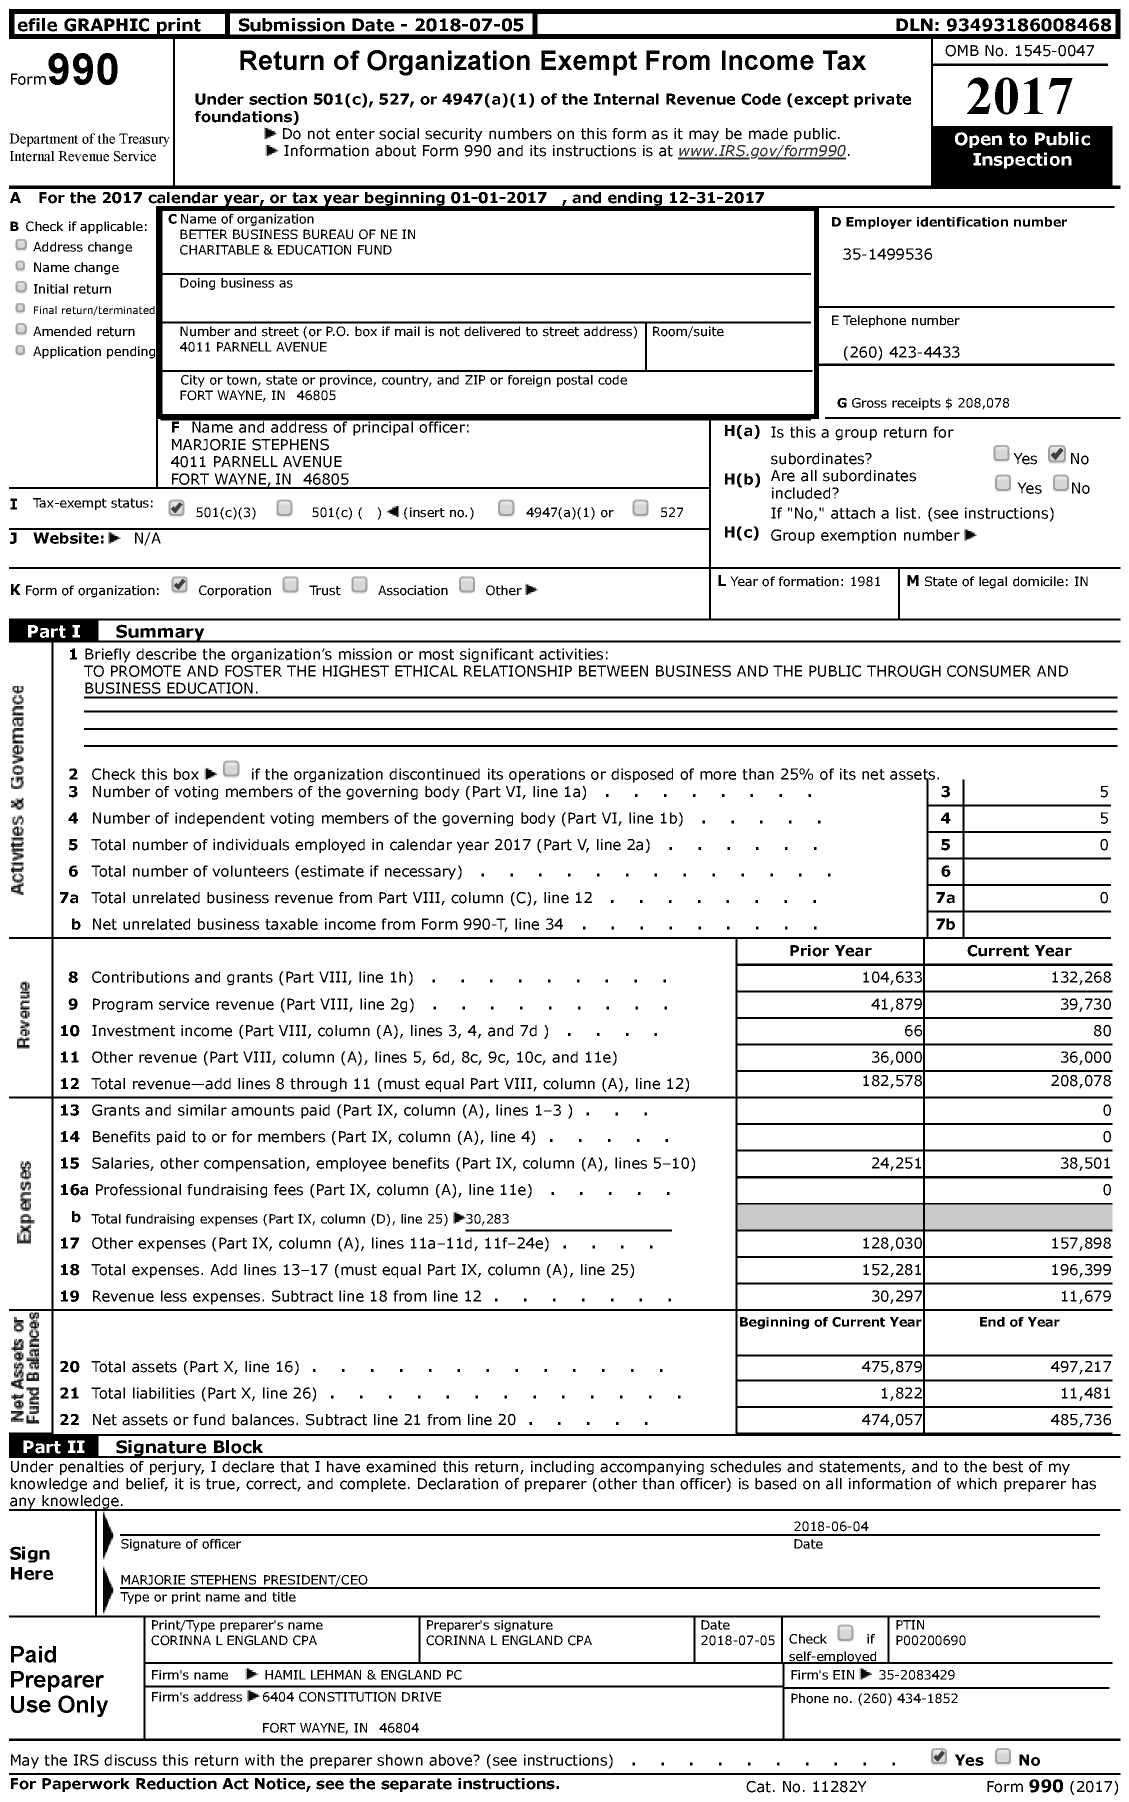 Image of first page of 2017 Form 990 for Better Business Bureau of Ne in Charitable and Education Fund